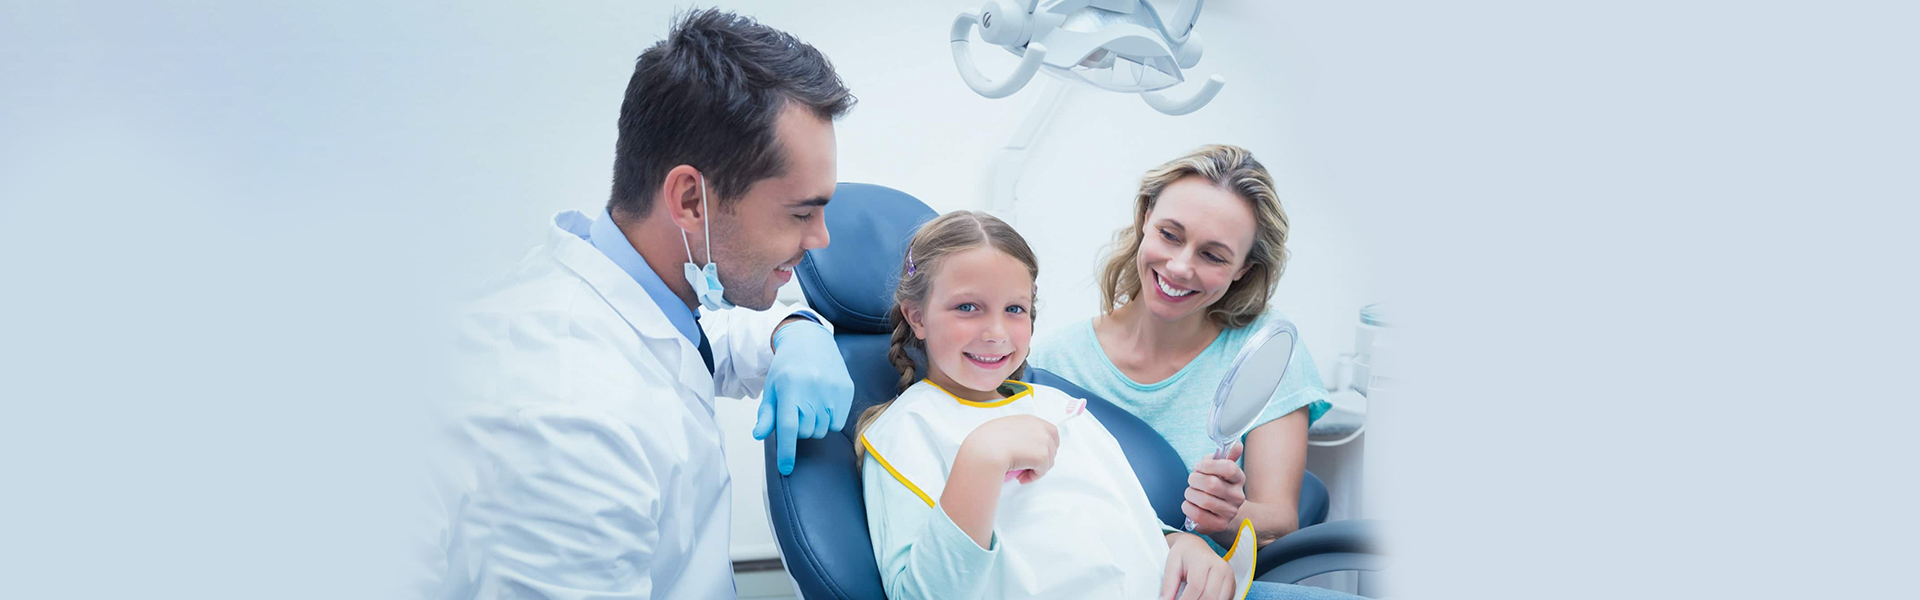 Why Dental Exams And Cleaning Are Important For Children?